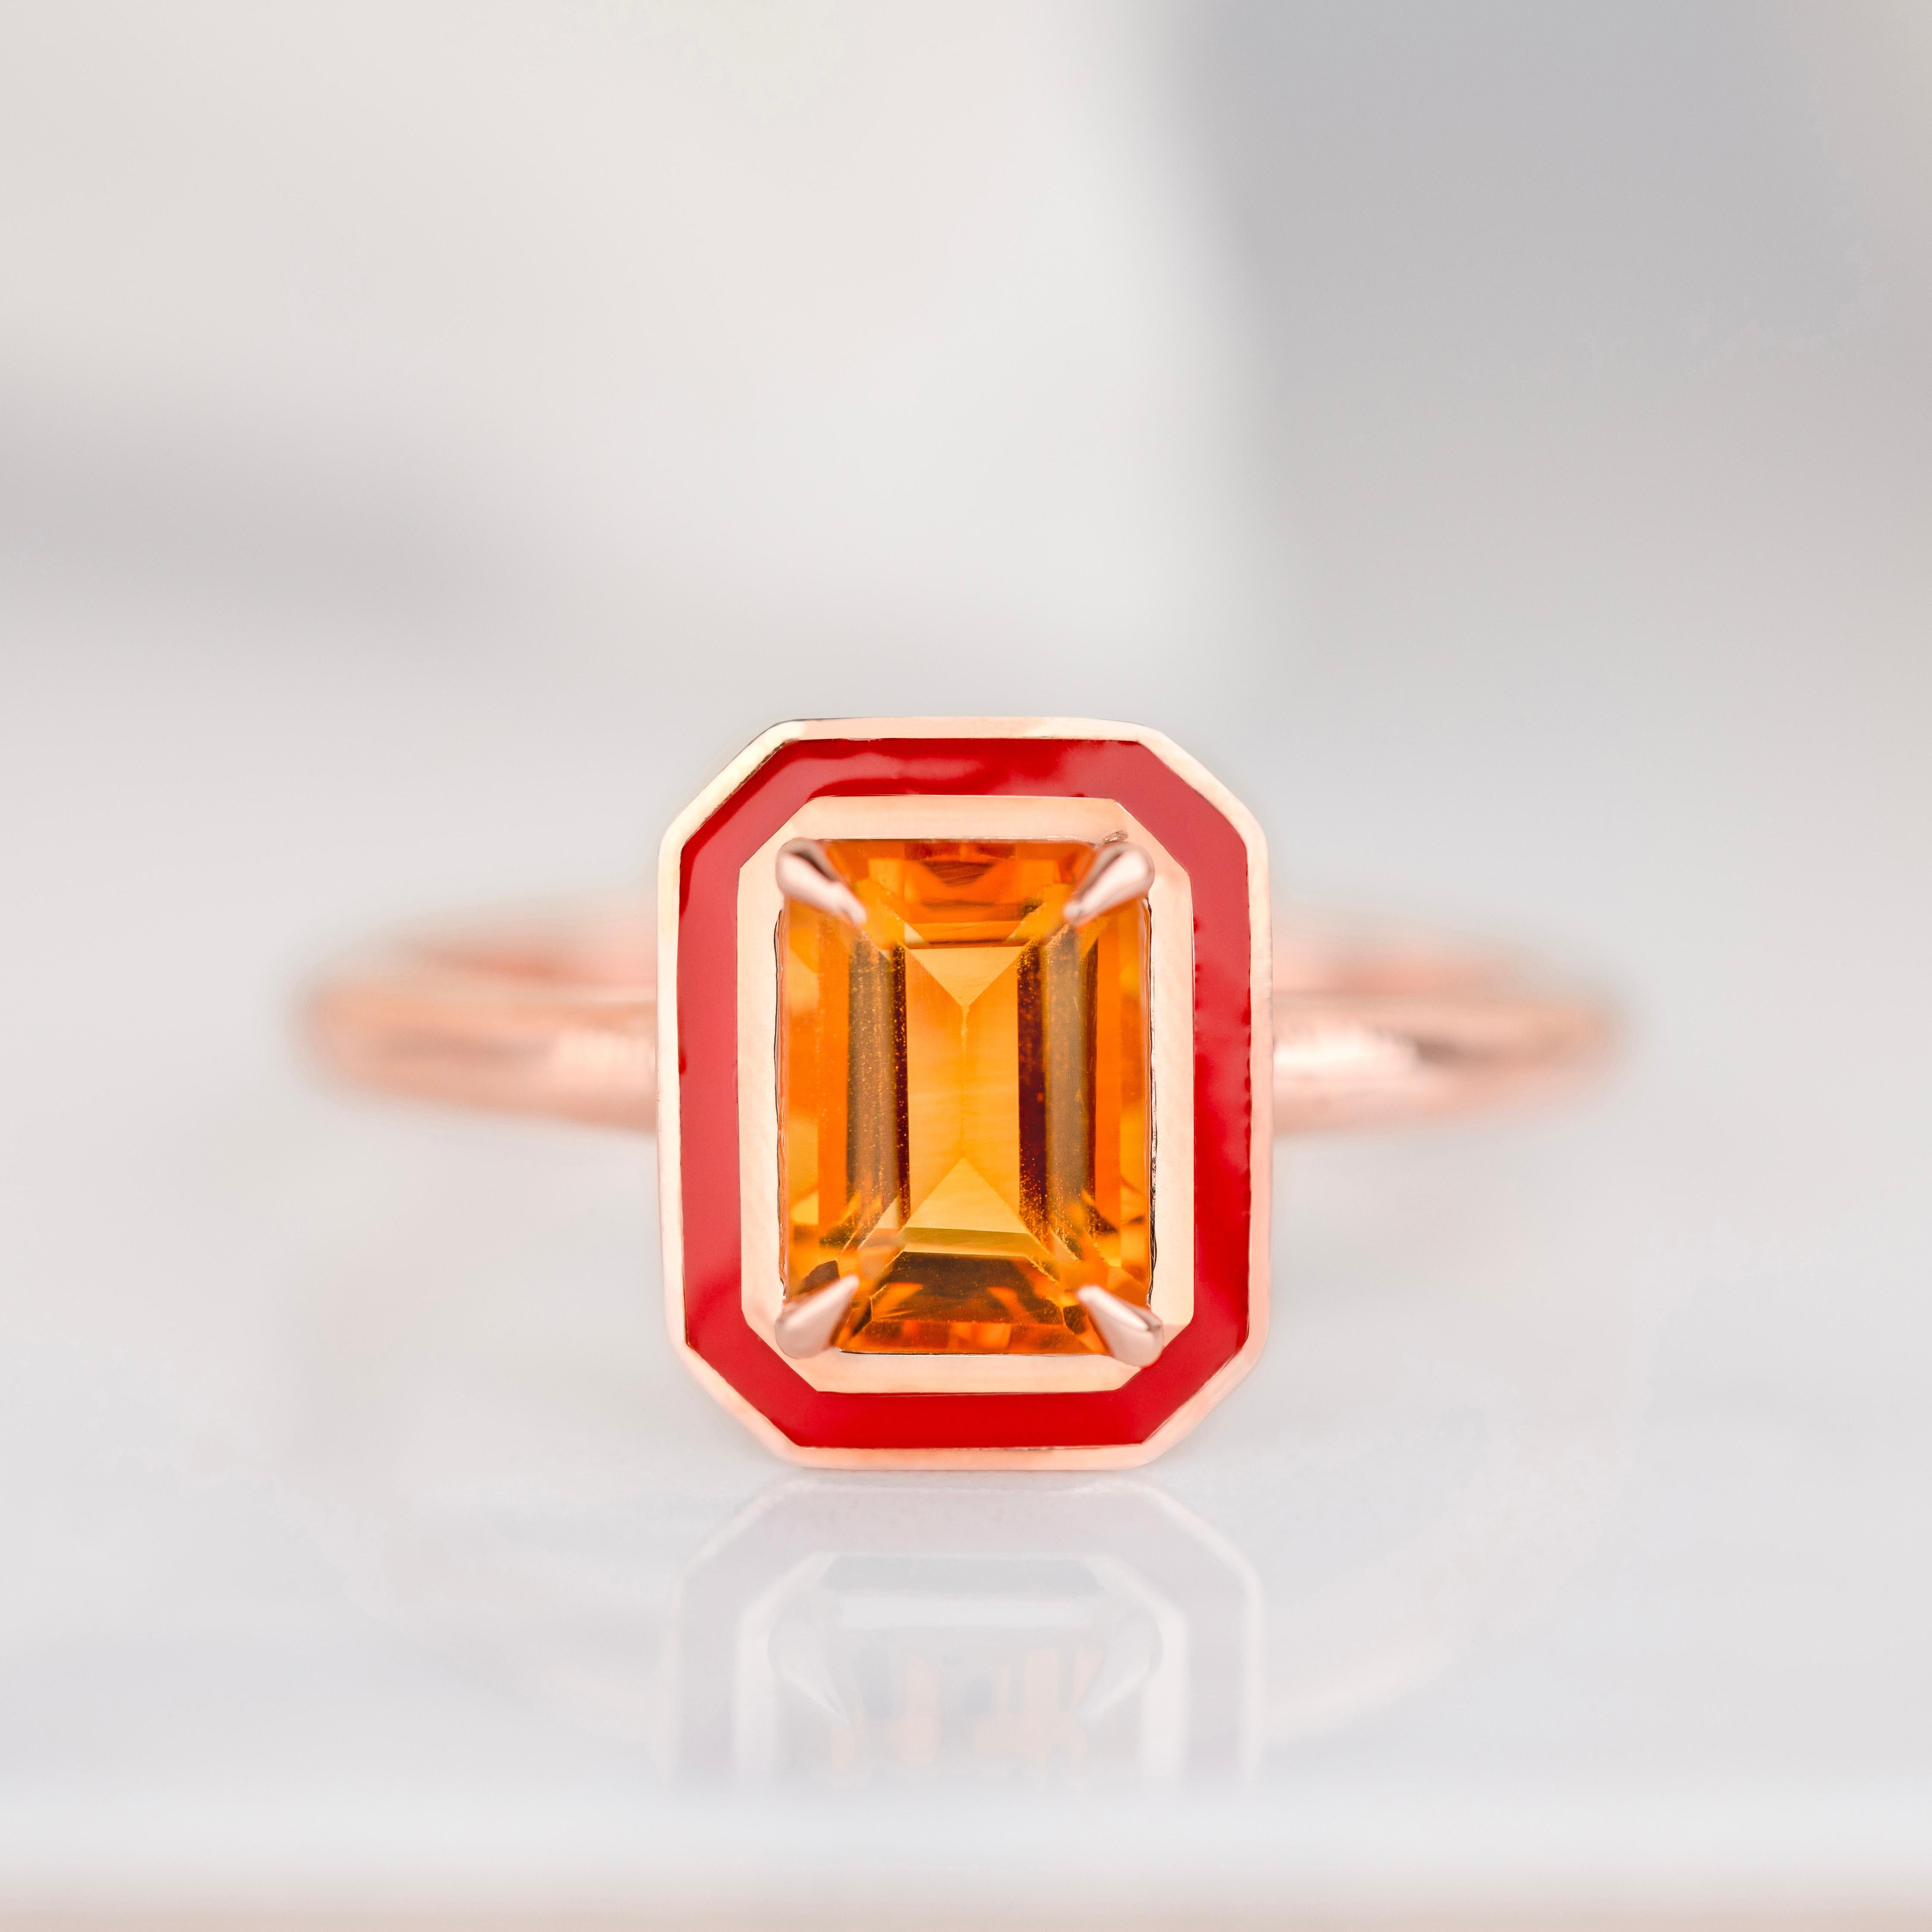 Art Deco and Cocktail Style Ring, 0.90-1.00 Ct Citrine Stone and Colorful Enamel Ring, 14K Gold Cocktail Ring 

This ring was made with quality materials and excellent handwork. I guarantee the quality assurance of my handwork and materials. It is